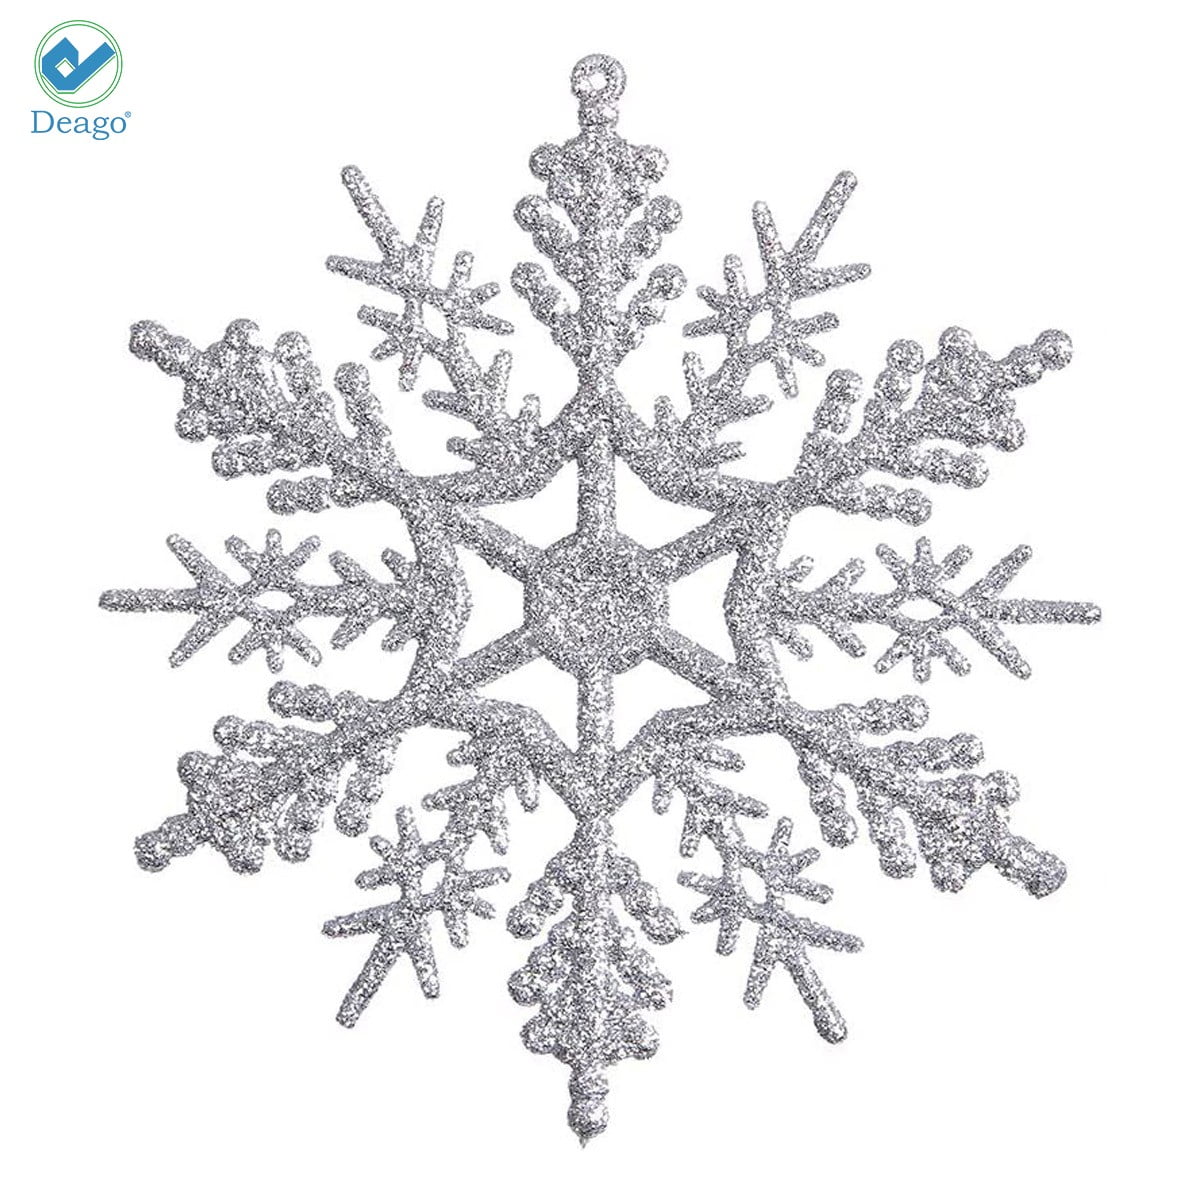 Silver glitter snowflakes and stars clipart PNG